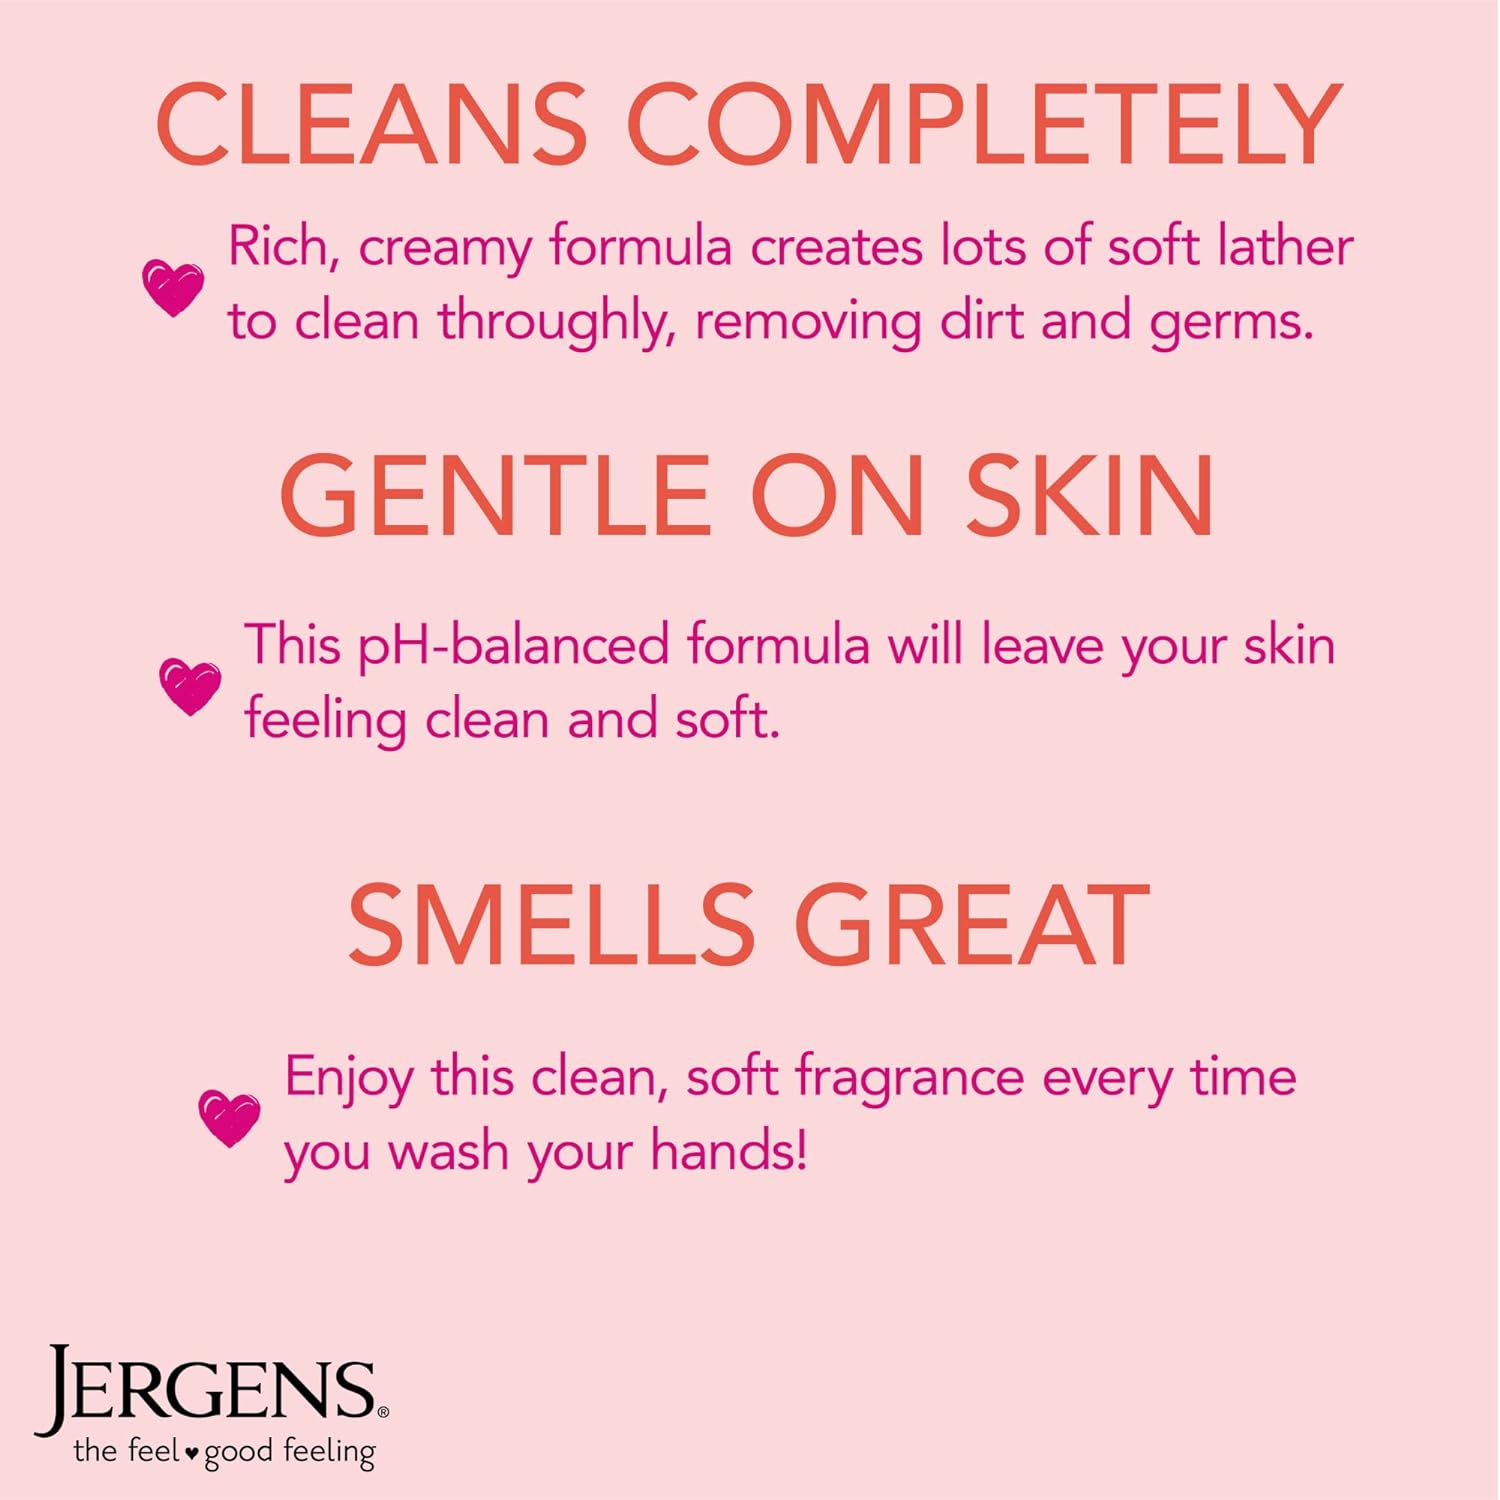 Jergens Extra Moisturizing Hand Soap, Liquid Hand Soap Dispenser with Jergens Cherry Almond Scent, Hand Wash For Dry Hands, 8.3 Ounces (Pack of 3) : Beauty & Personal Care